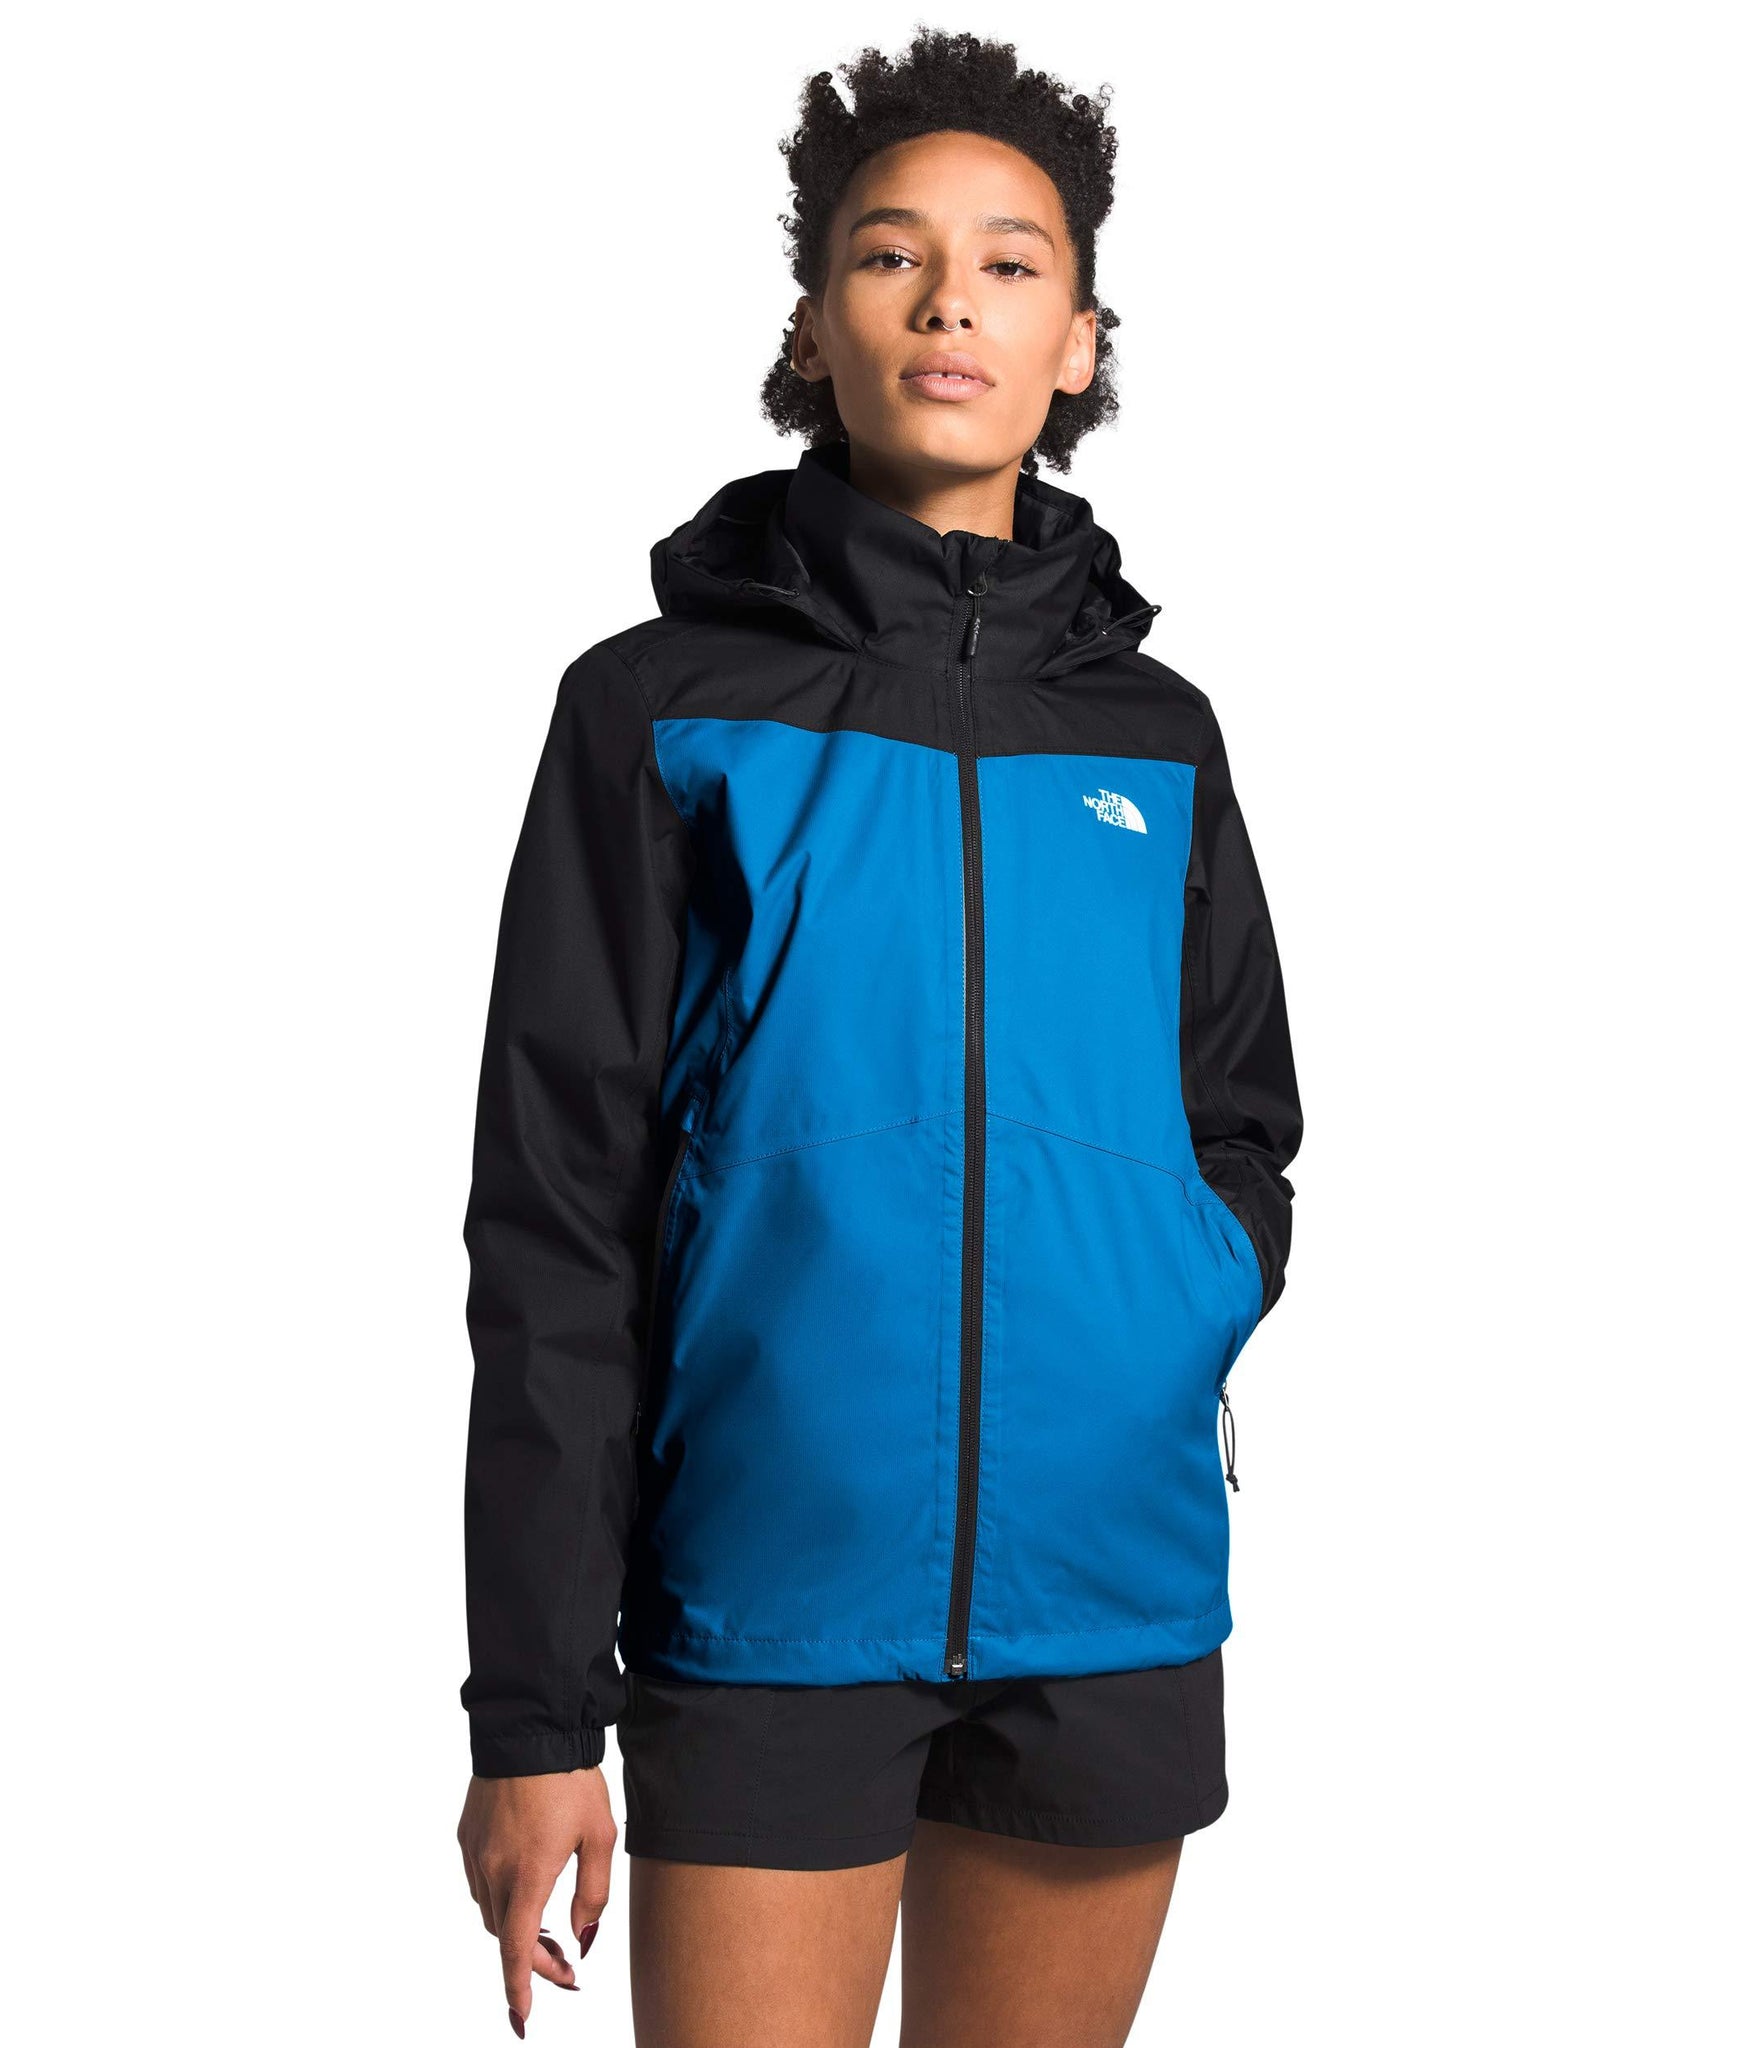 north face w resolve plus jacket